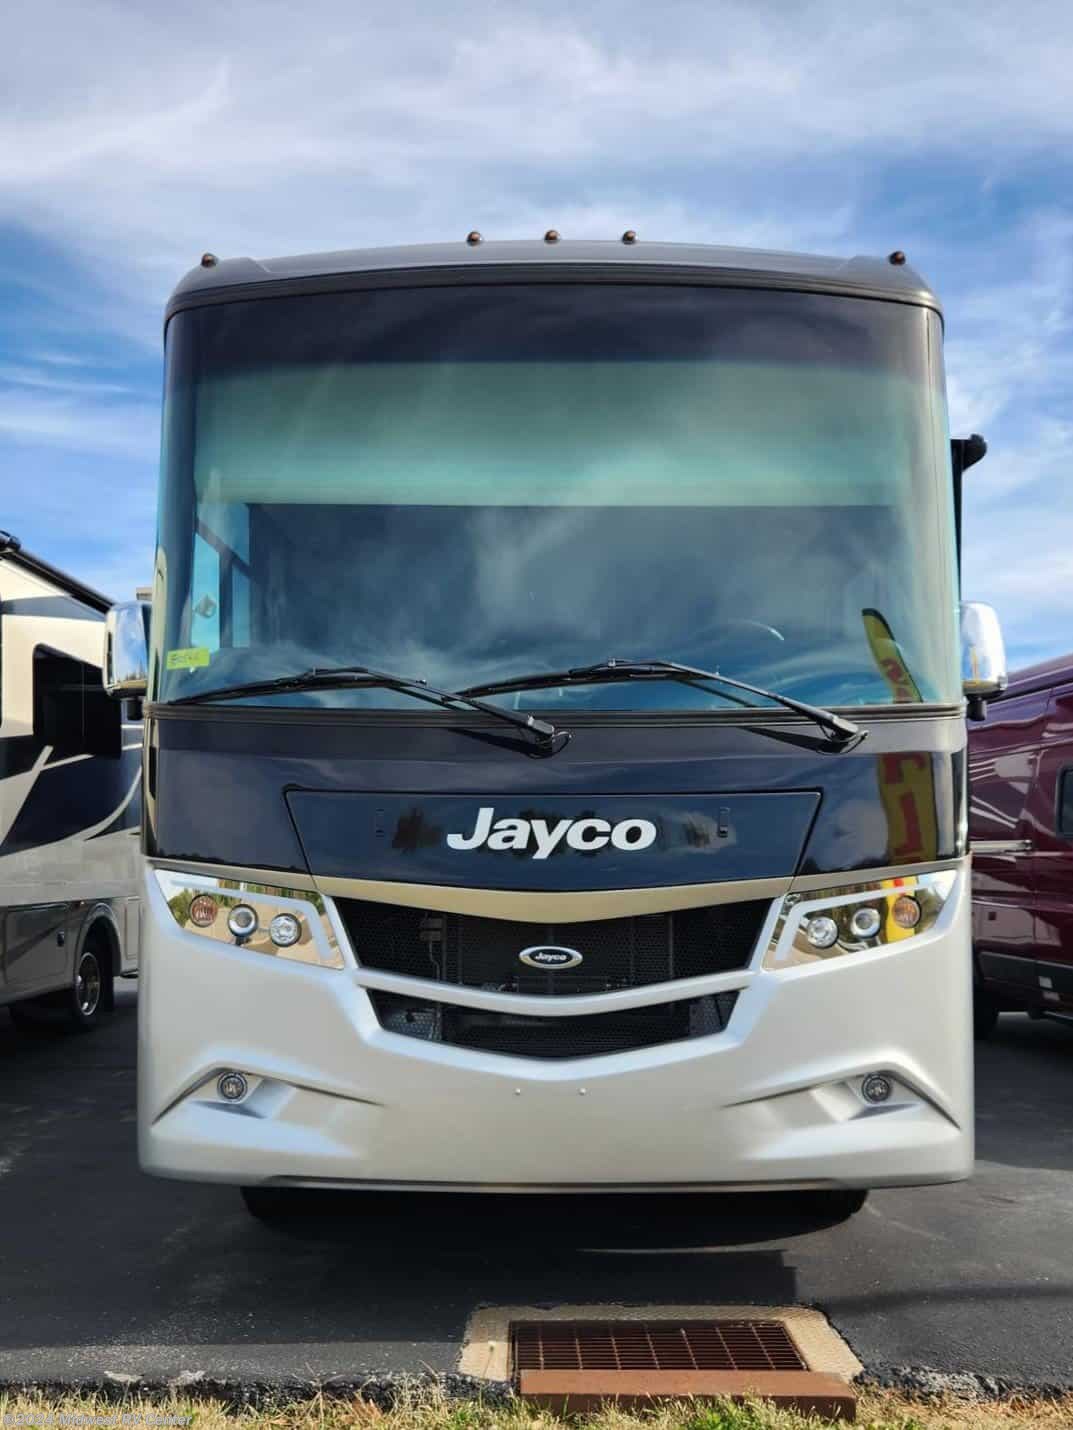 2023 Jayco Precept 34B RV for Sale in St Louis, MO 63129, 8054A